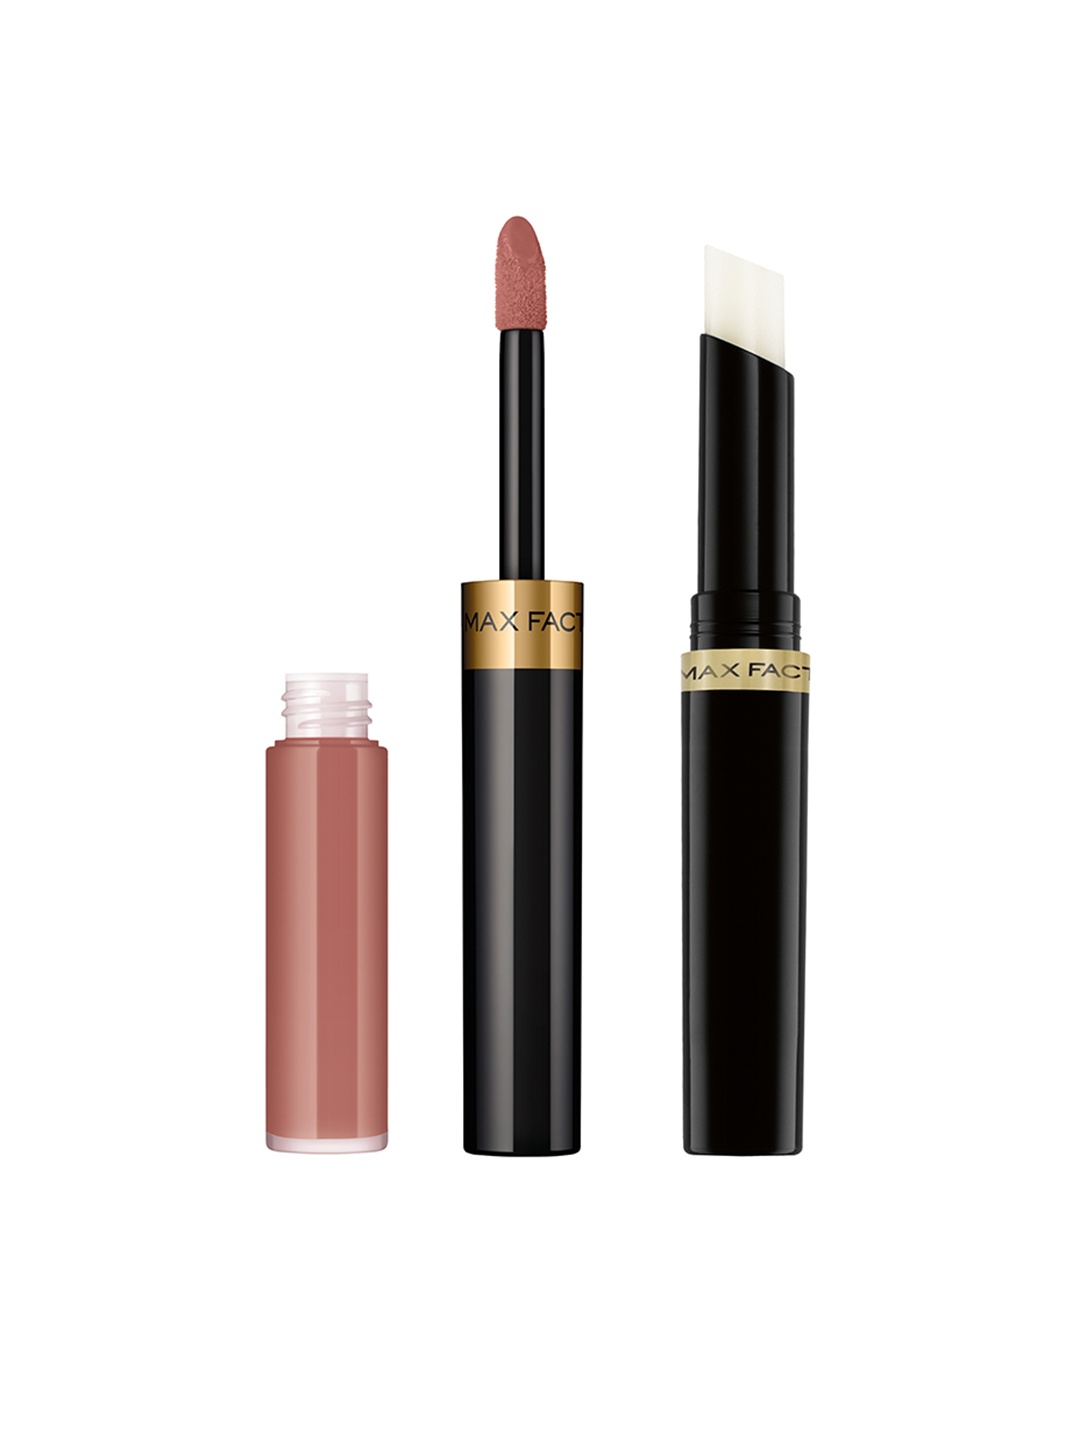 

Max Factor Lipfinity Long-Lasting Lip Colour 2.3ml with Top Coat 1.9g - Iced 160, Nude